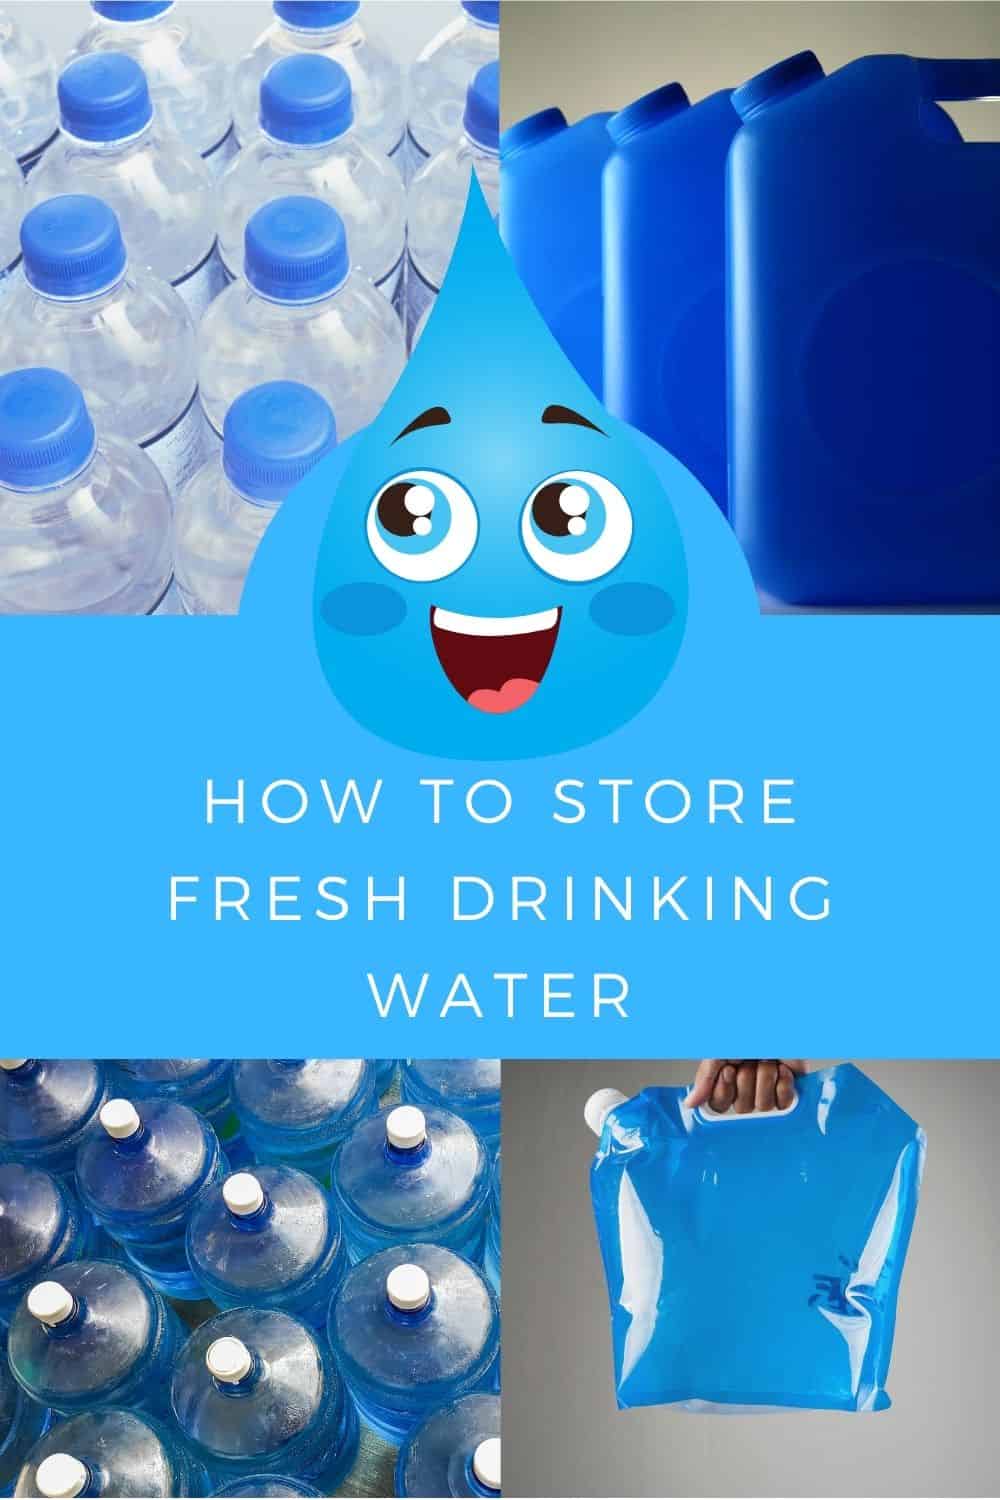 How to Store Fresh Drinking Water